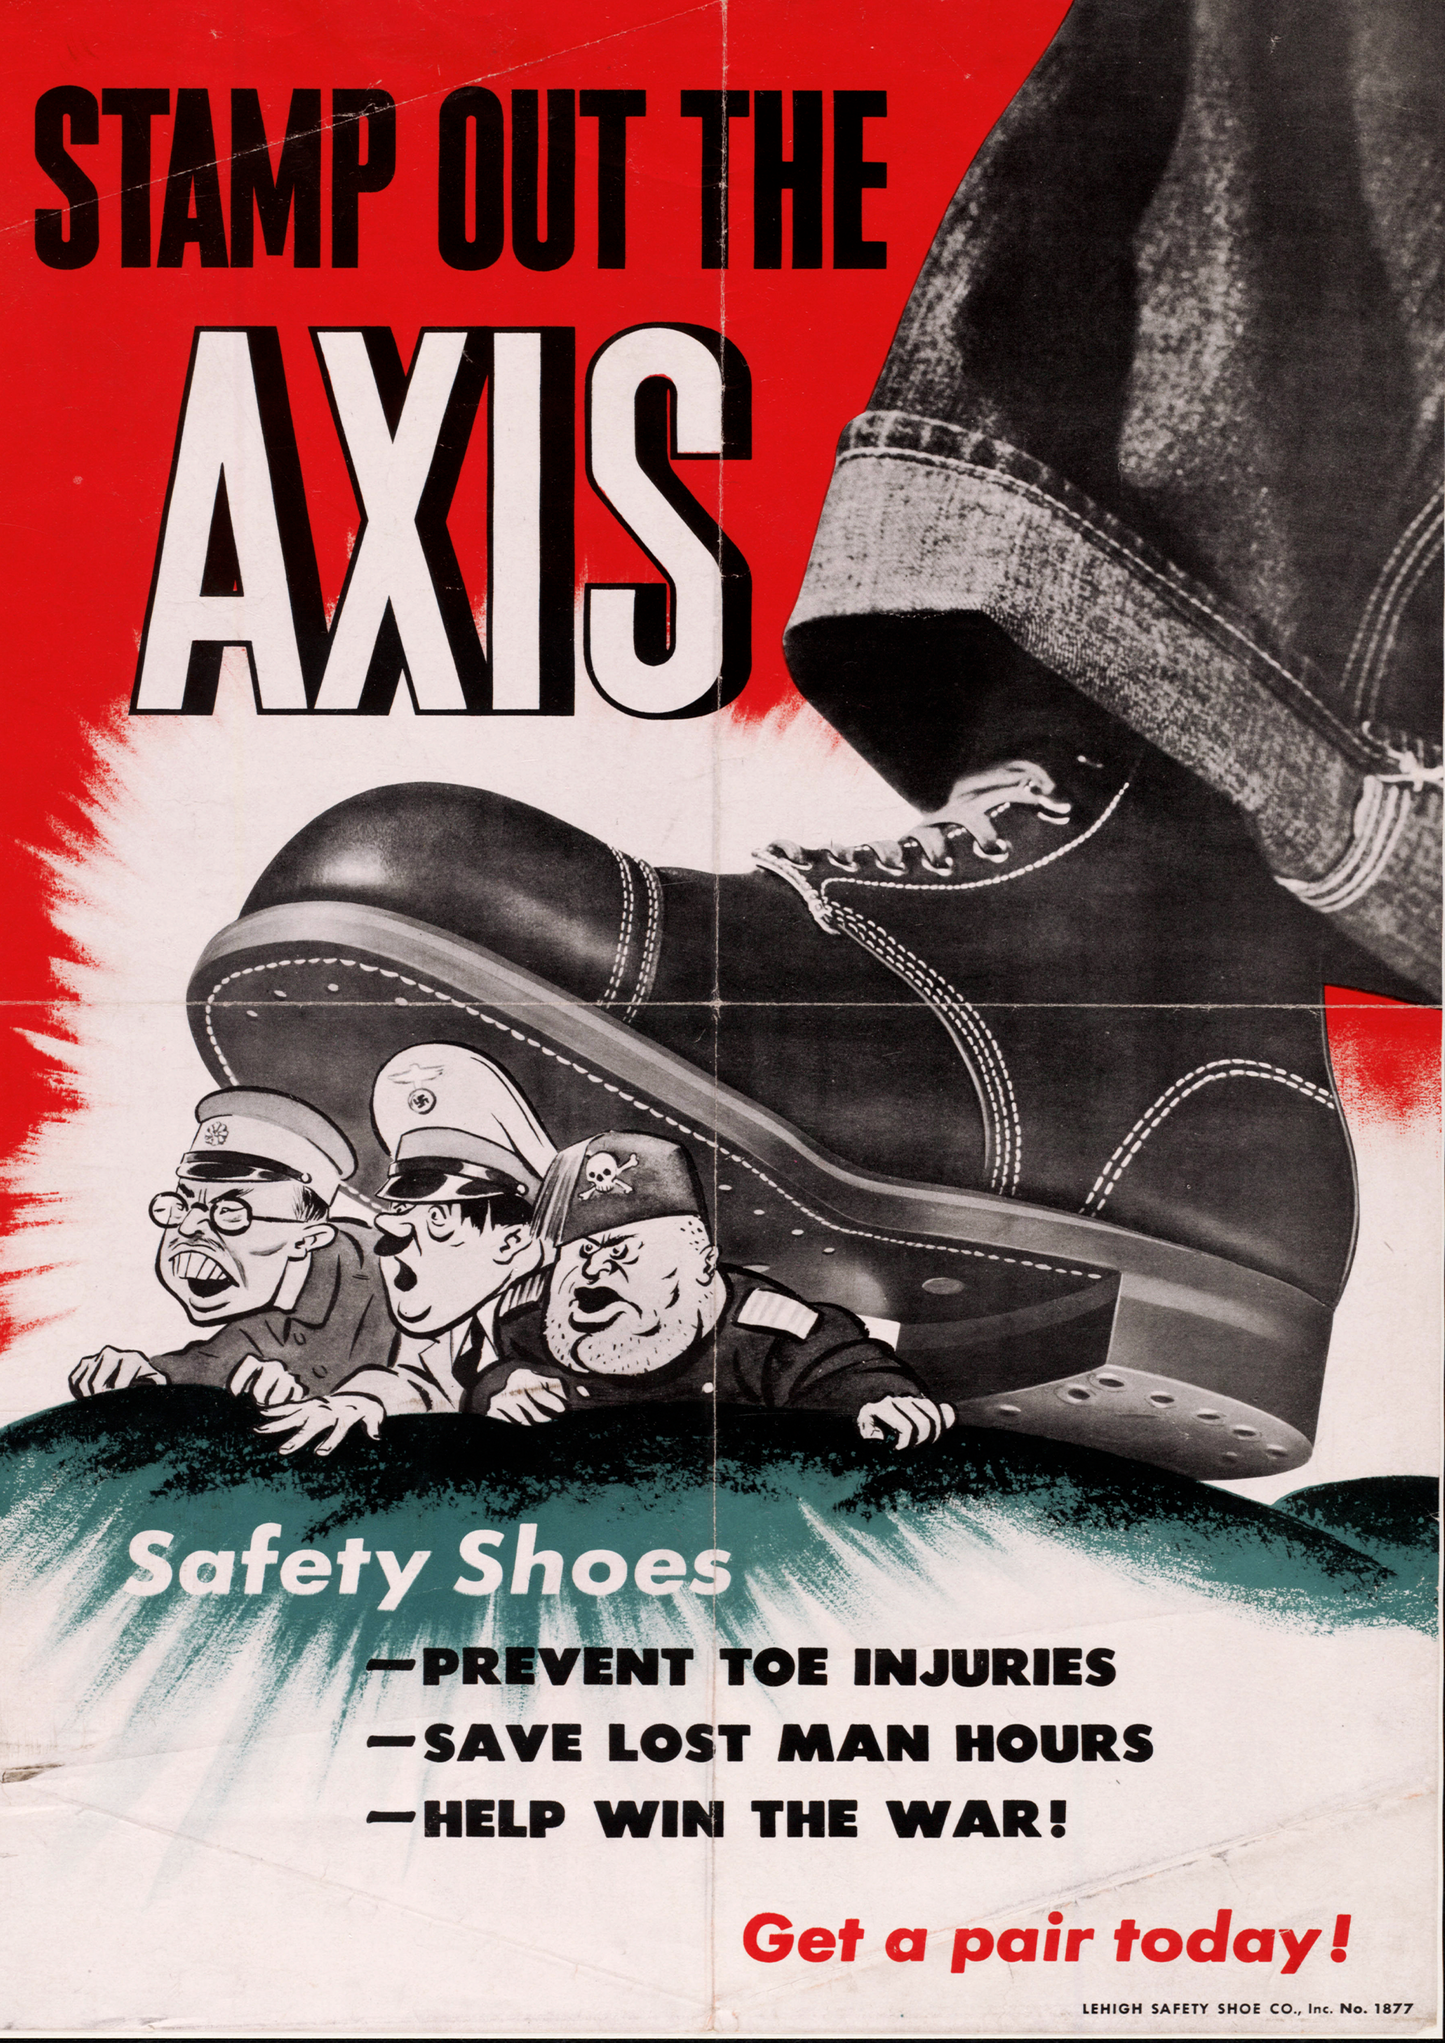 Stamp Out The Axis - American Poster